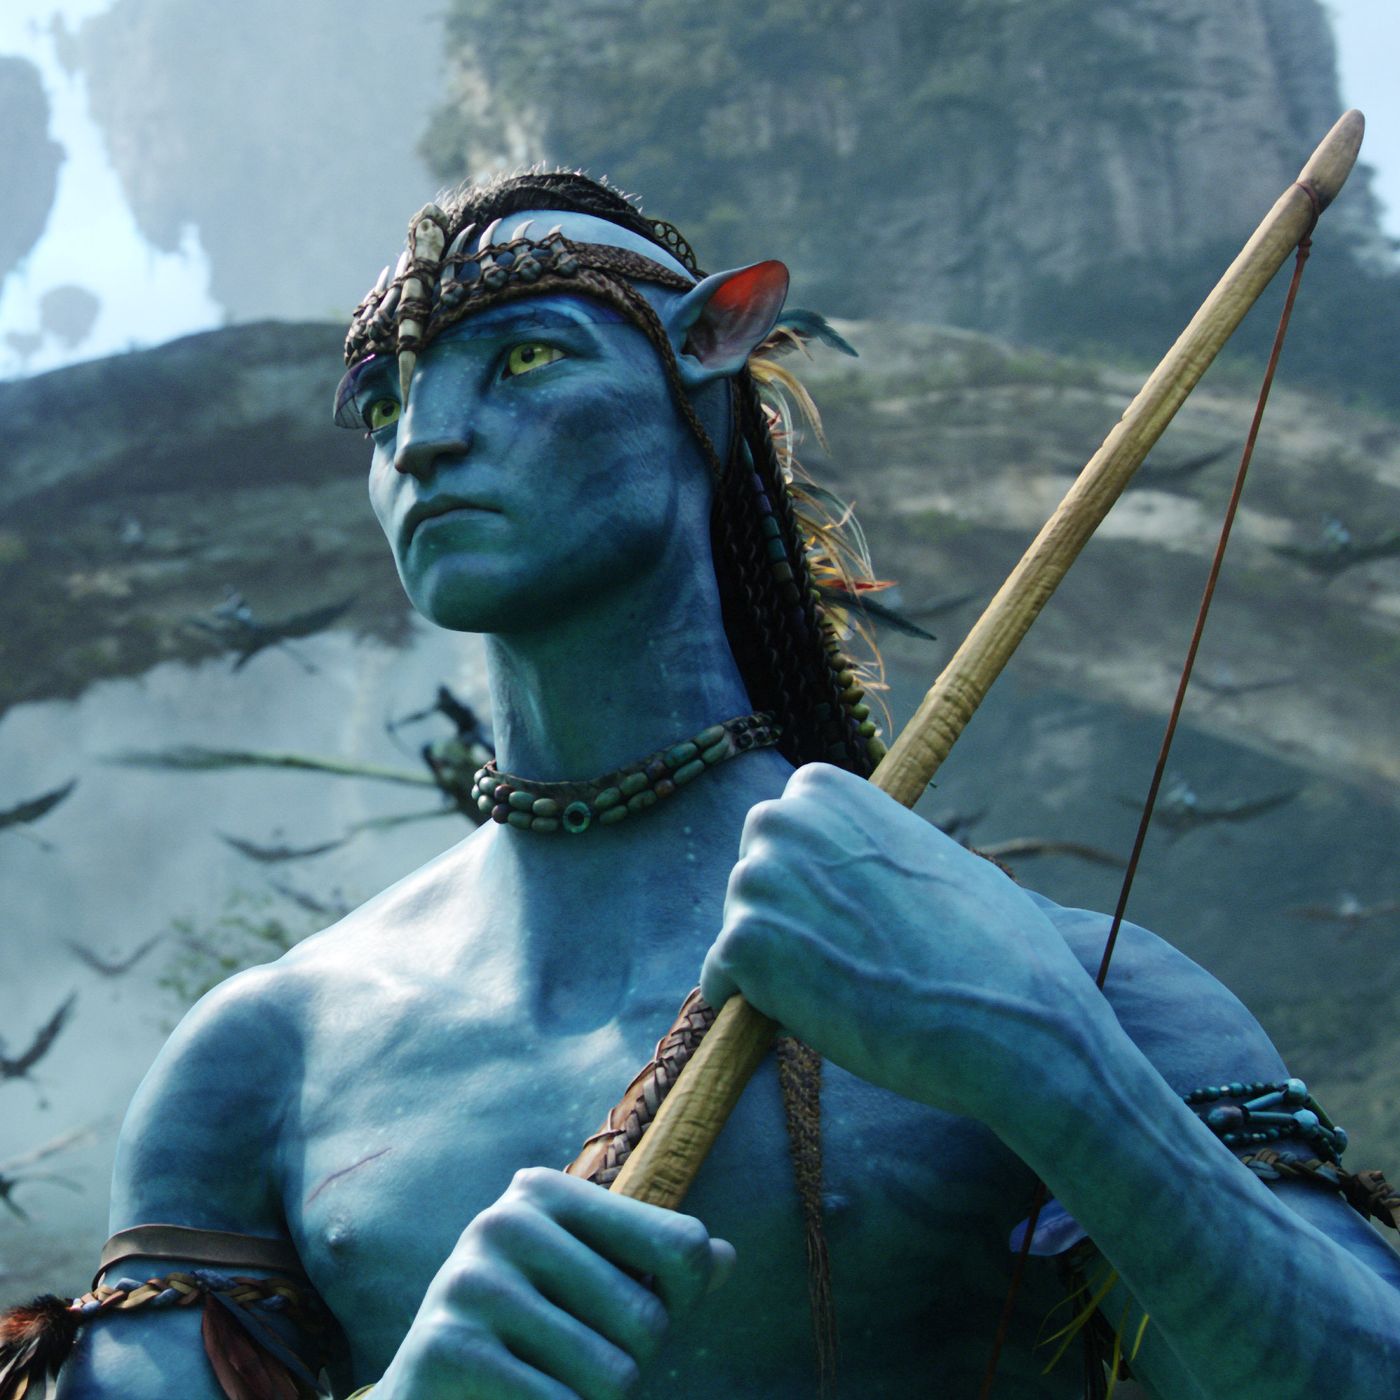 Avatar sequel character named after John Garvin who supervised film cast  and crews safety under water  ABC News